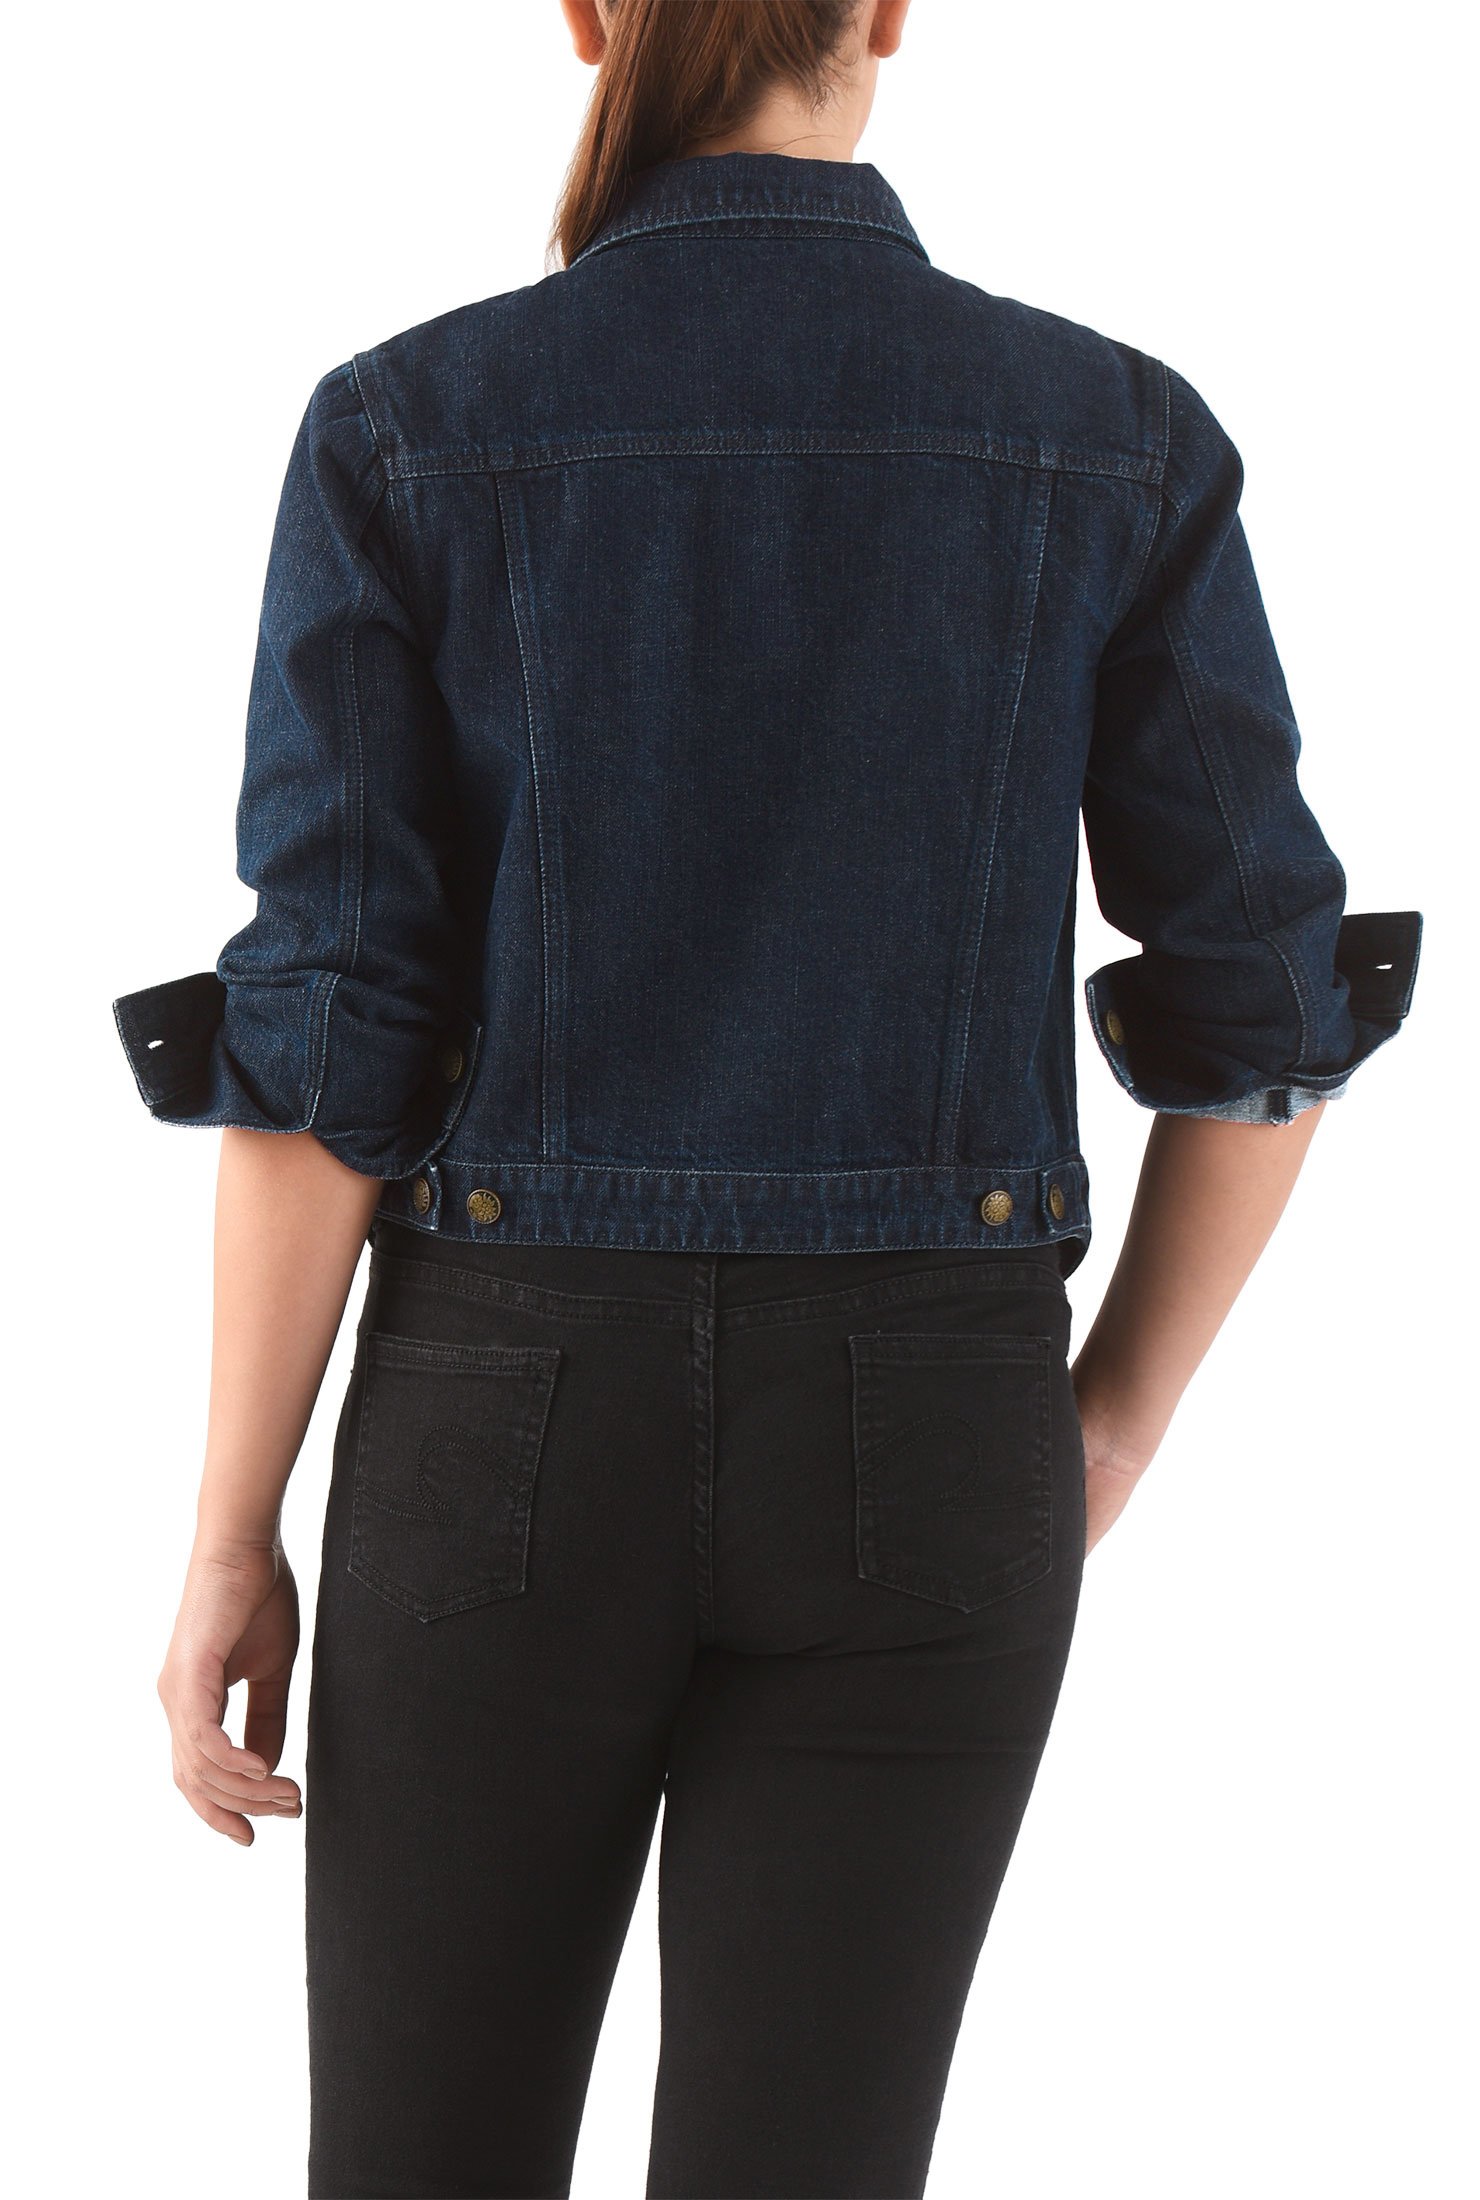 MUSE【CITIZENS OF HUMANITY 】DENIM JACKET